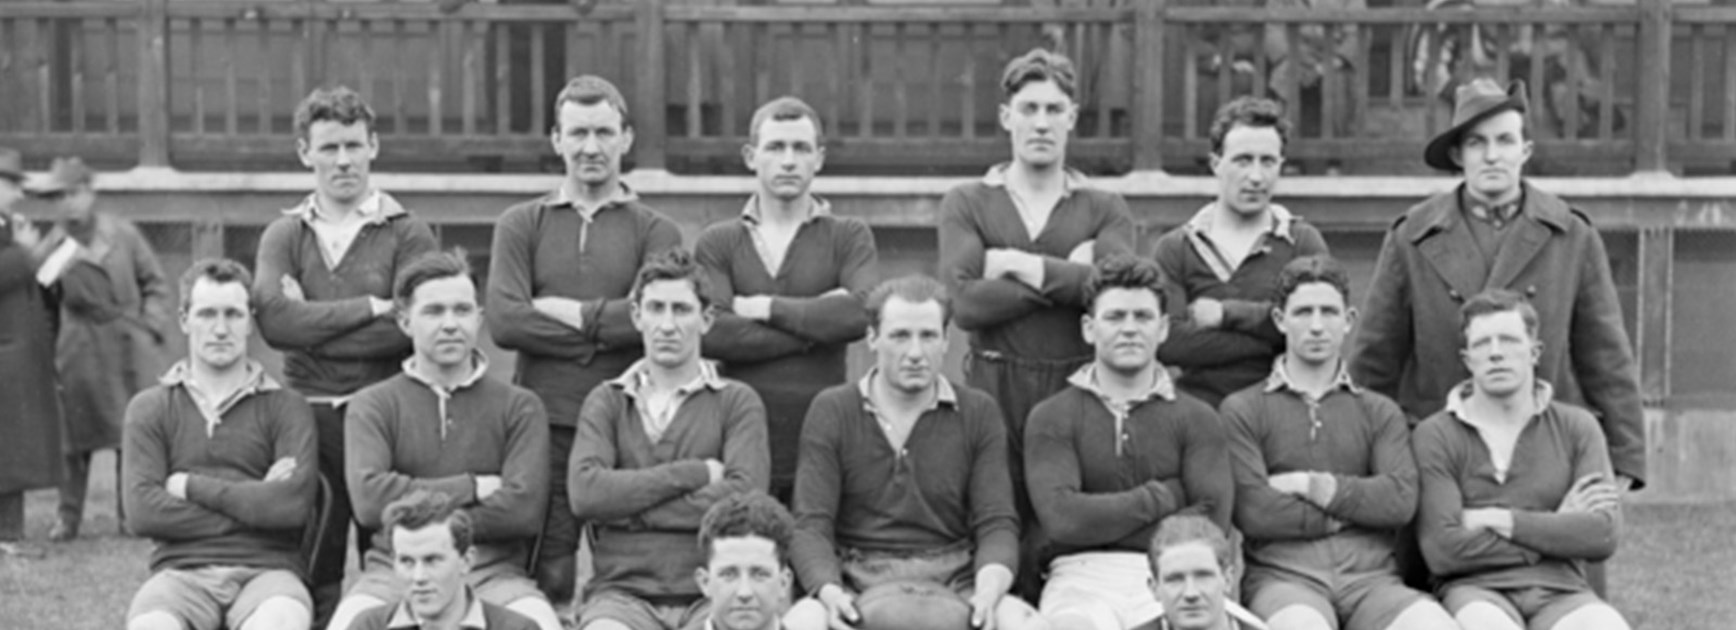 Stan Carpenter (back row; second from left) was captain of Newcastle in their first season in 1908.